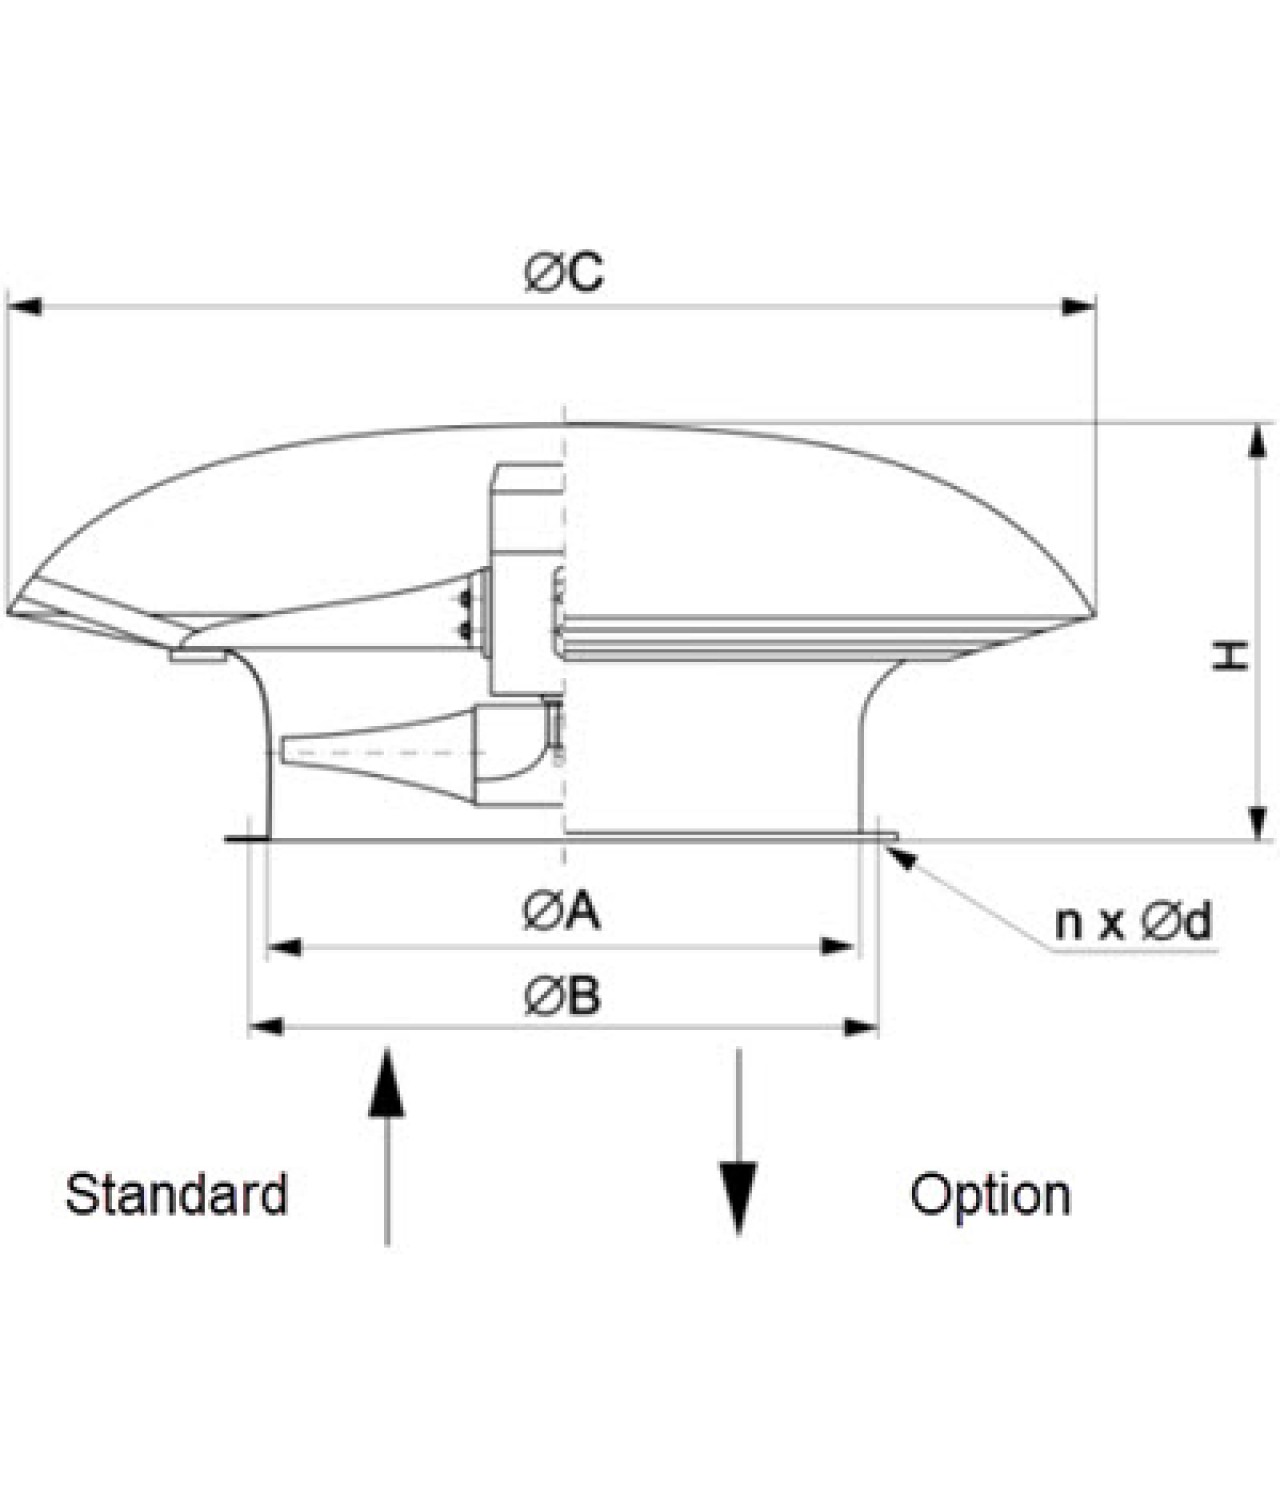 Axial roof fans SVWOD ≤7370 m³/h - drawing